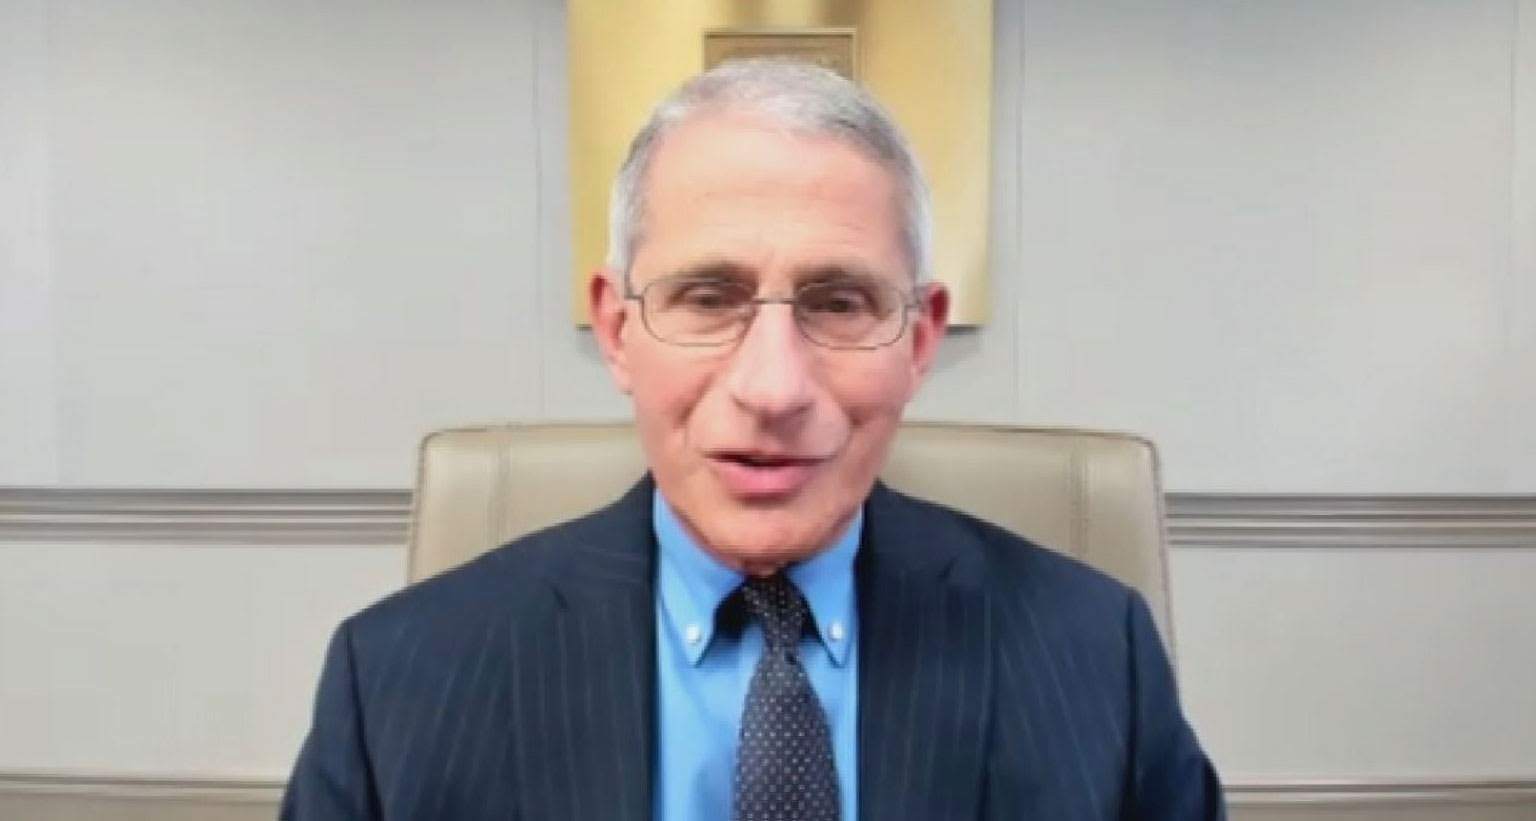 As U.S. coronavirus instances spike, nation will ‘be seeing extra deaths,’ Dr. Fauci says